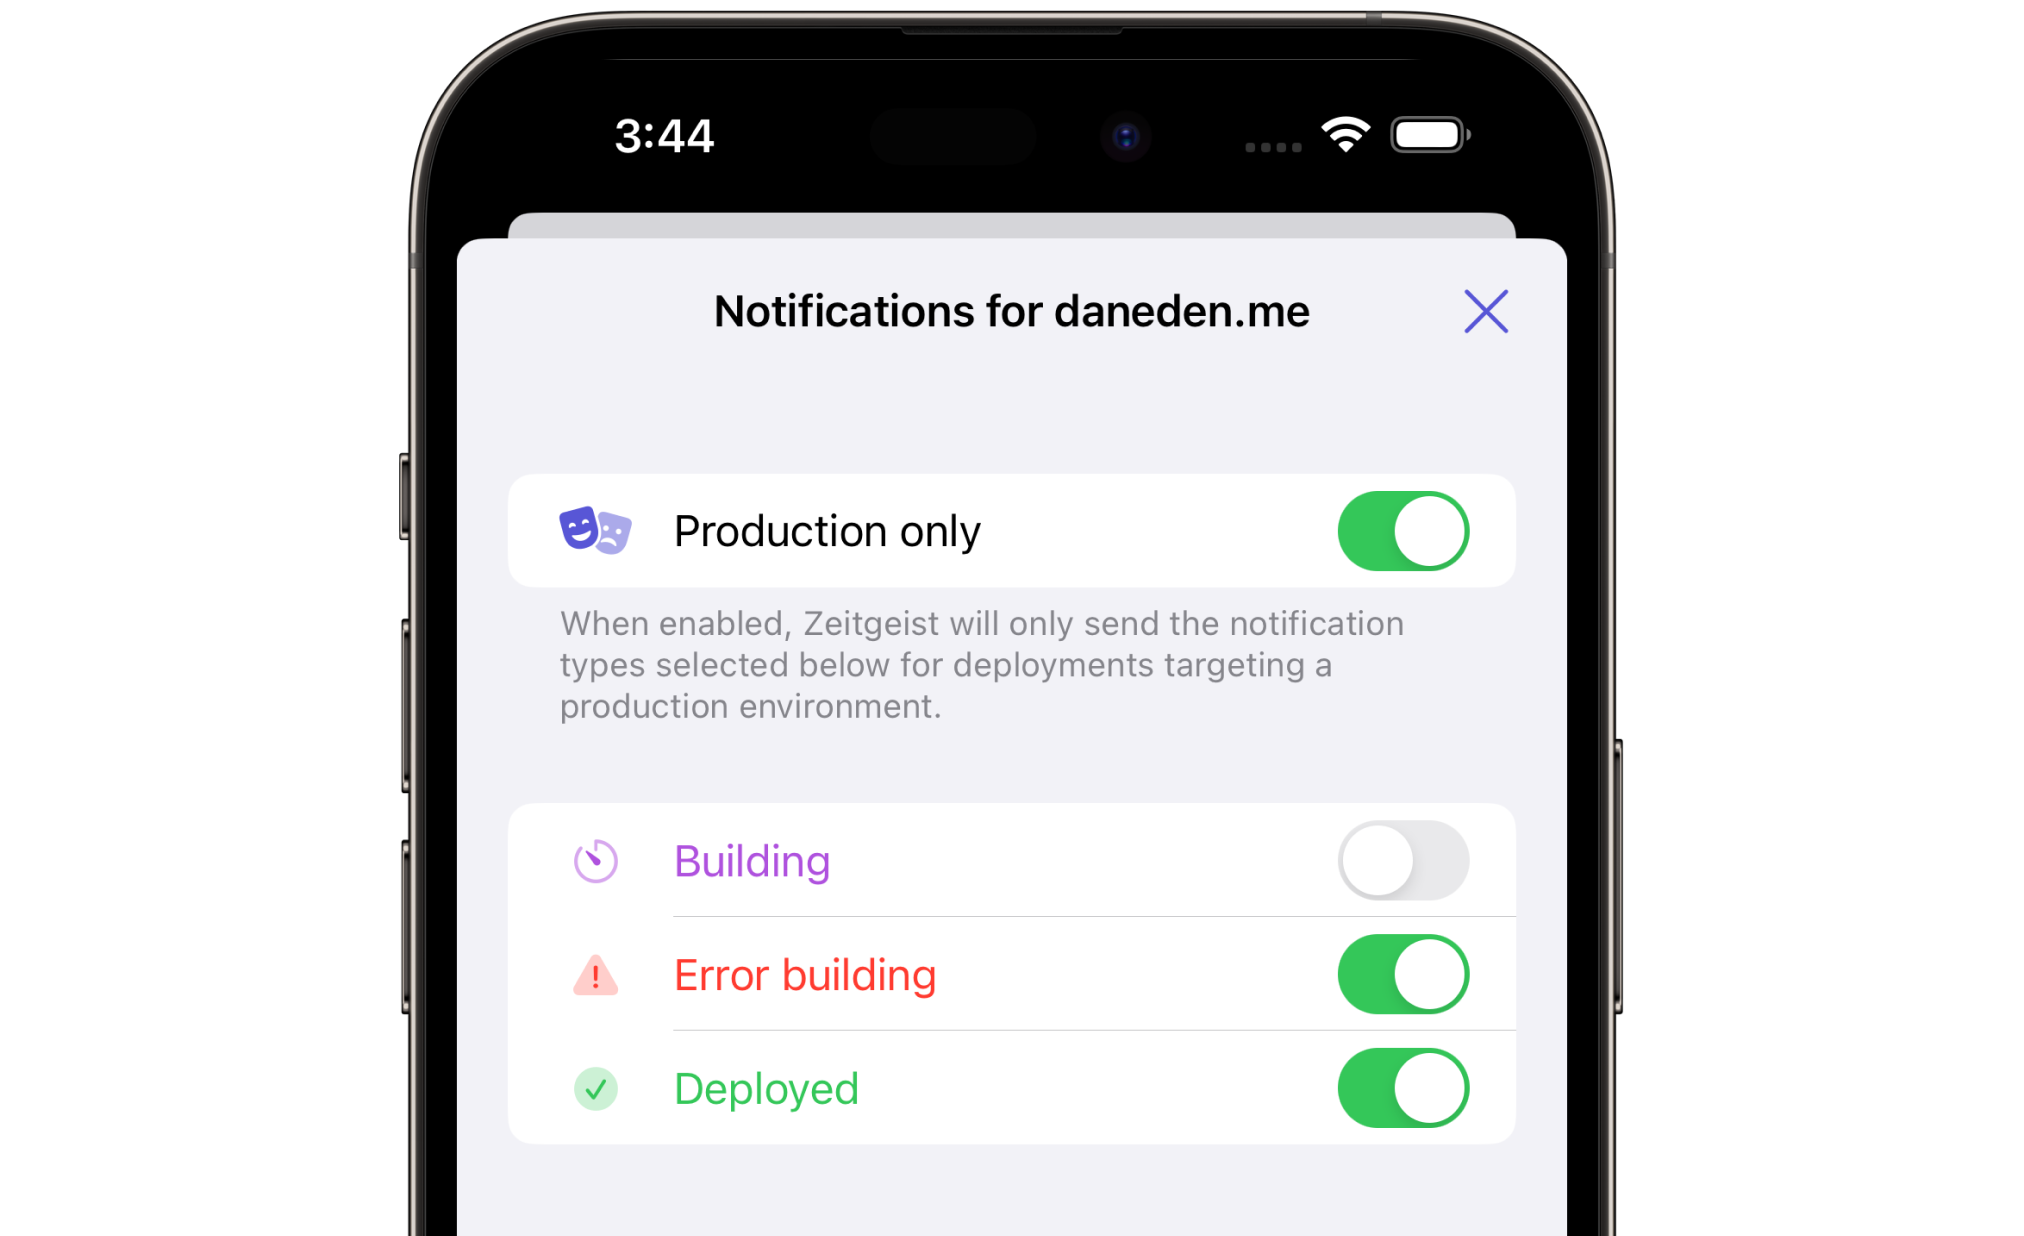 Notification settings for a project named daneden.me. “Production only”, “Error building”, and “Deployed” are toggled on.